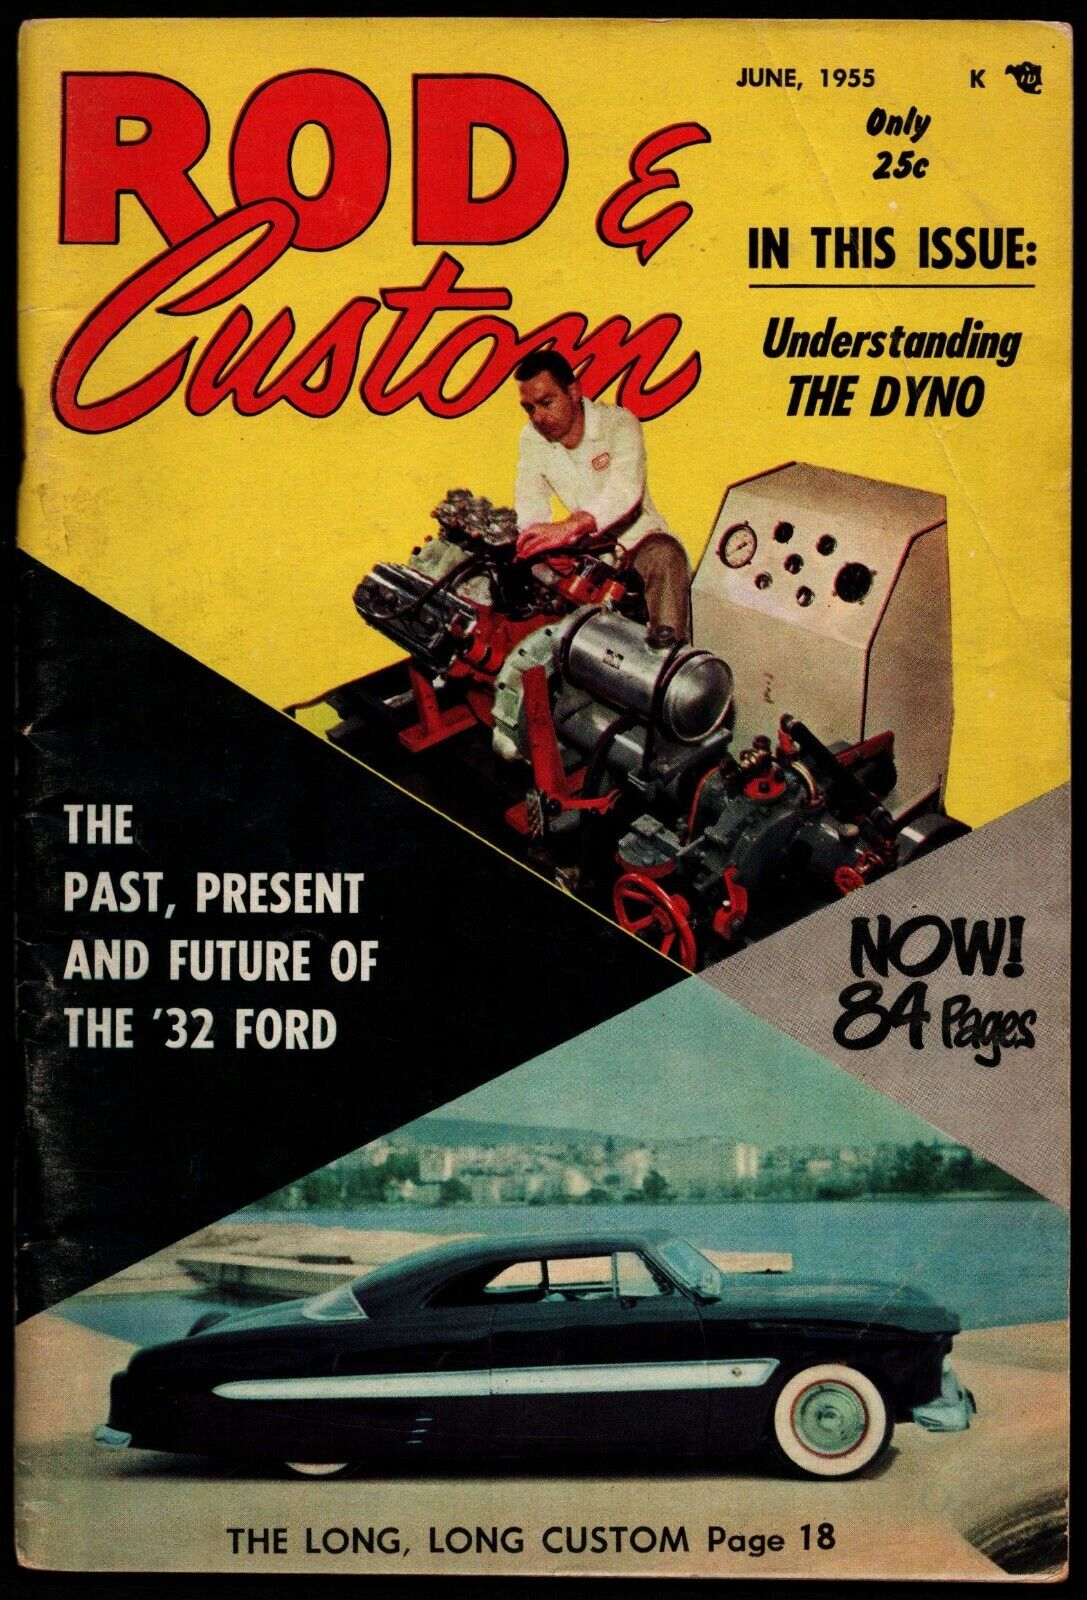 JUNE 1955 ROD & CUSTOM MAGAZINE, THE '32 FORD, '50 FORD, UNDERSTANDING THE DYNO